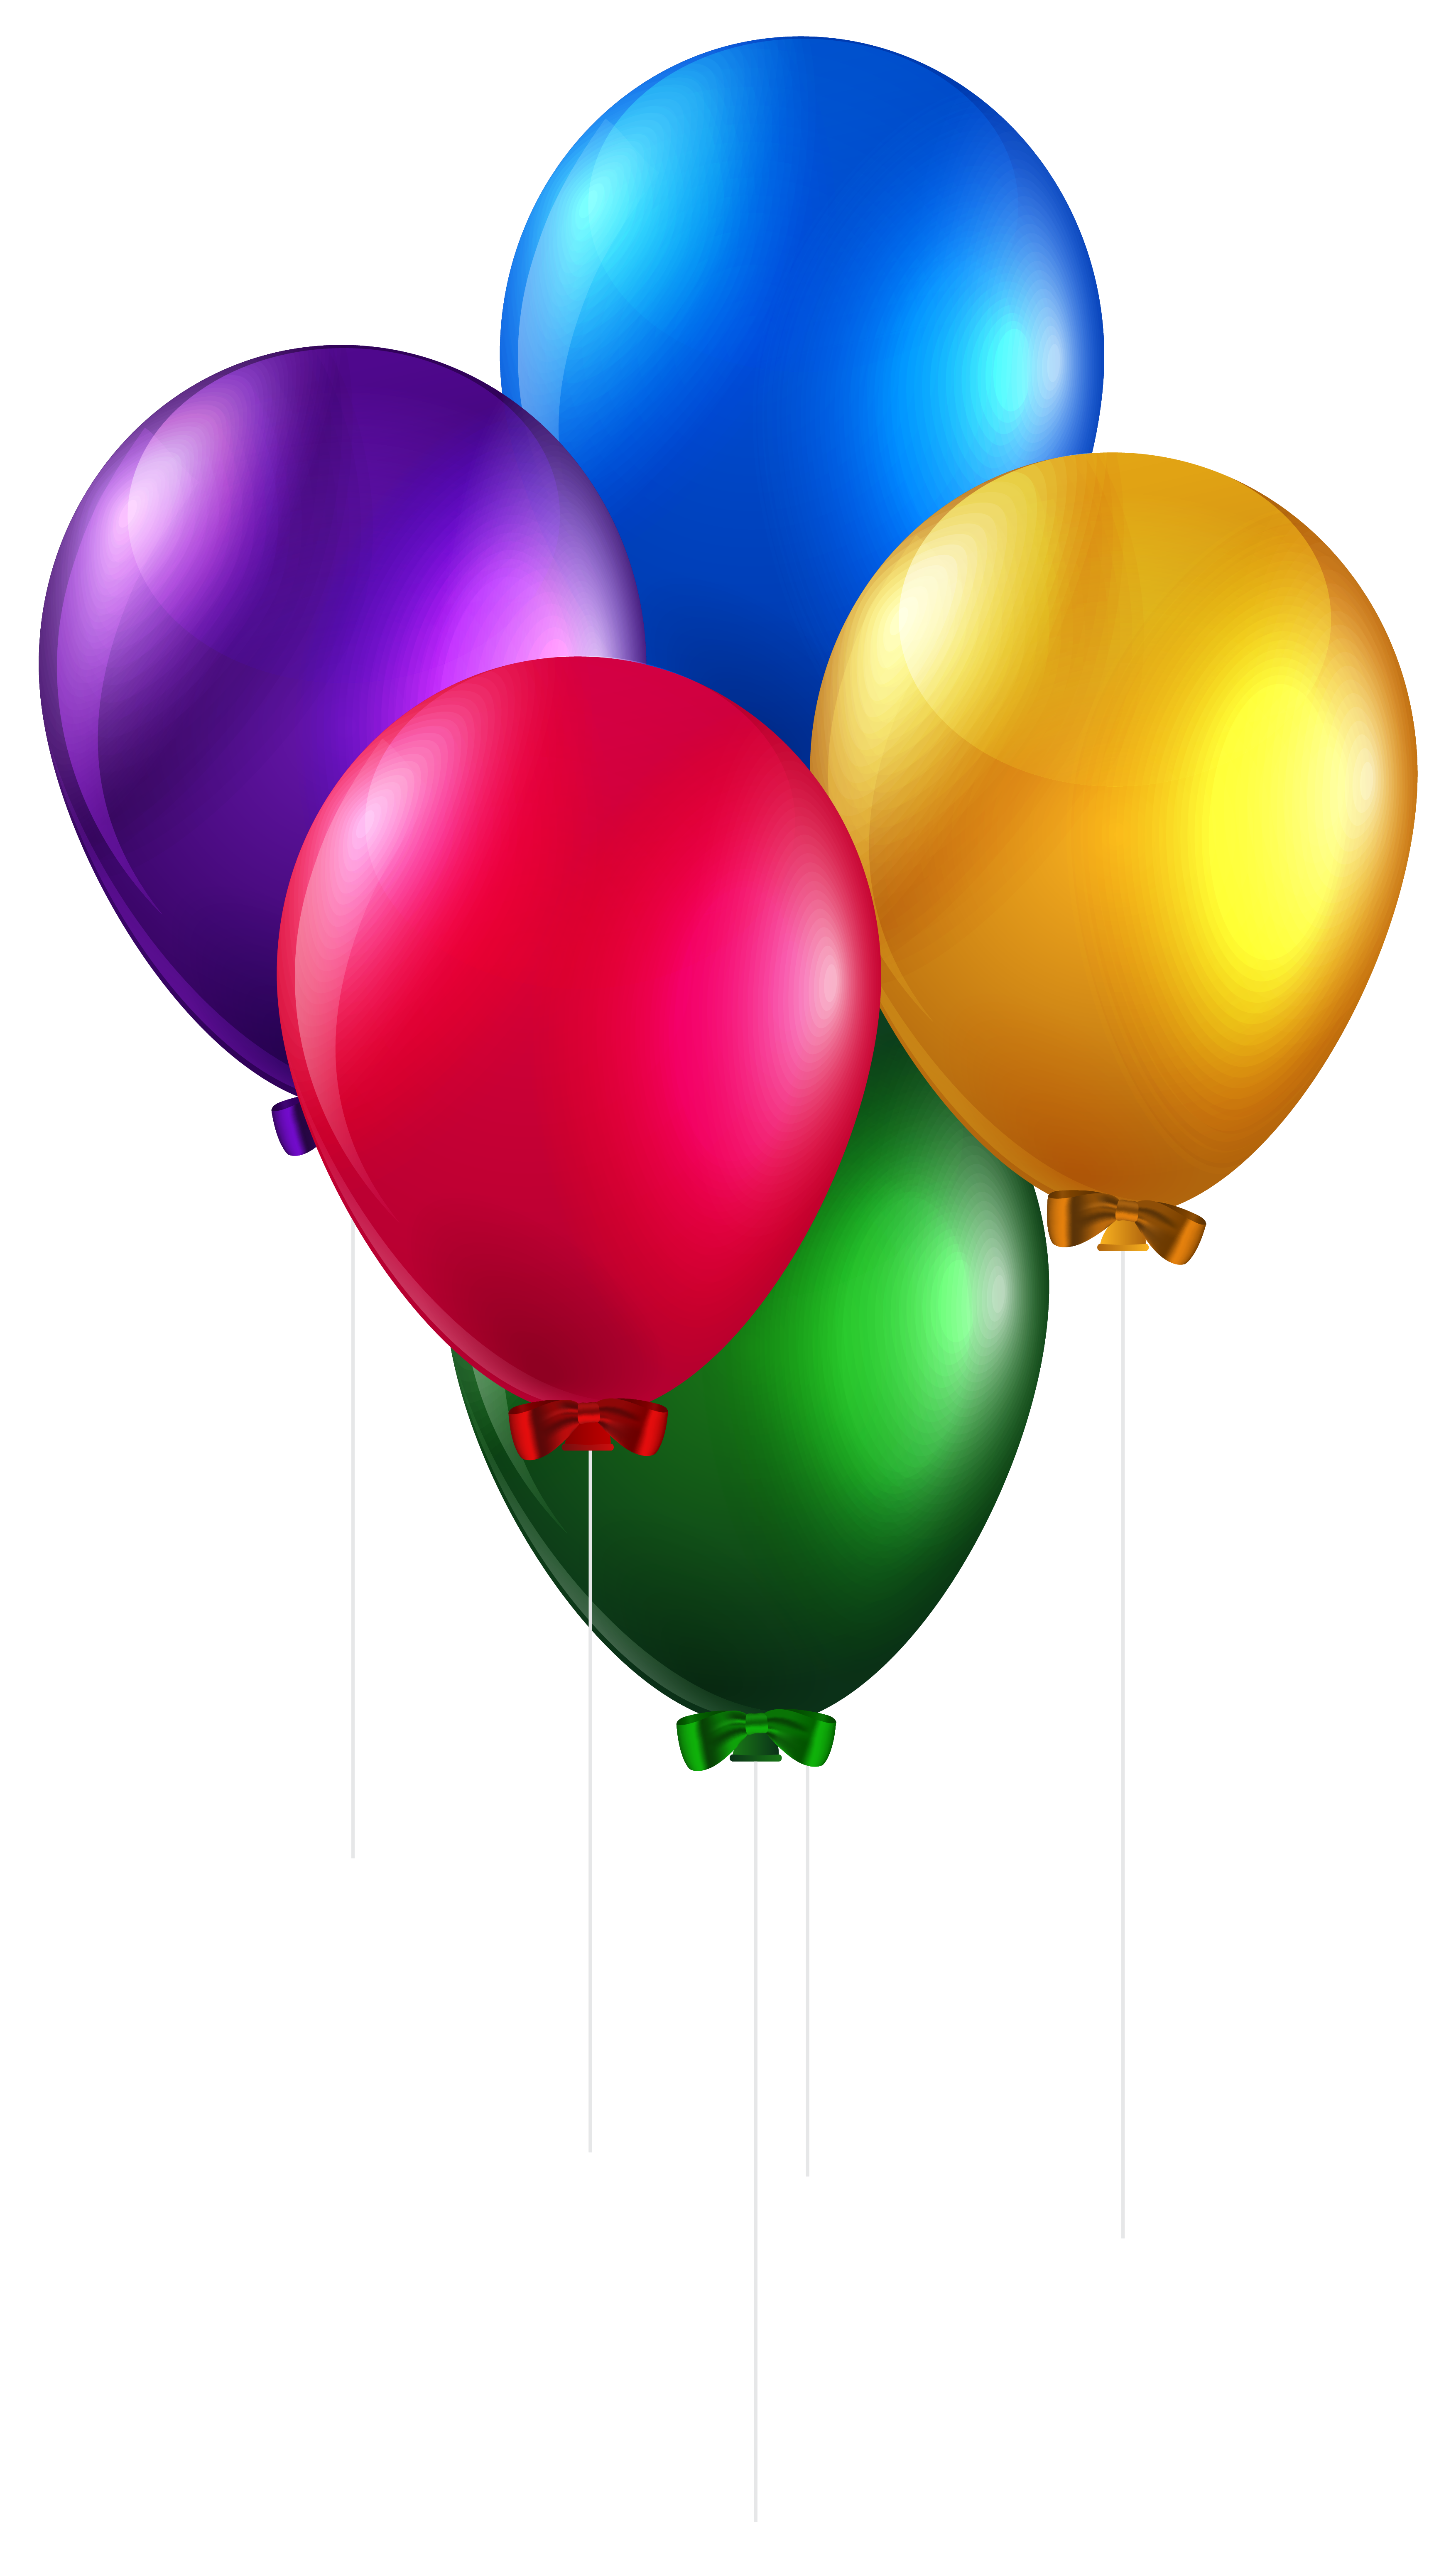 Transparent Balloons Bunch Clipart Image